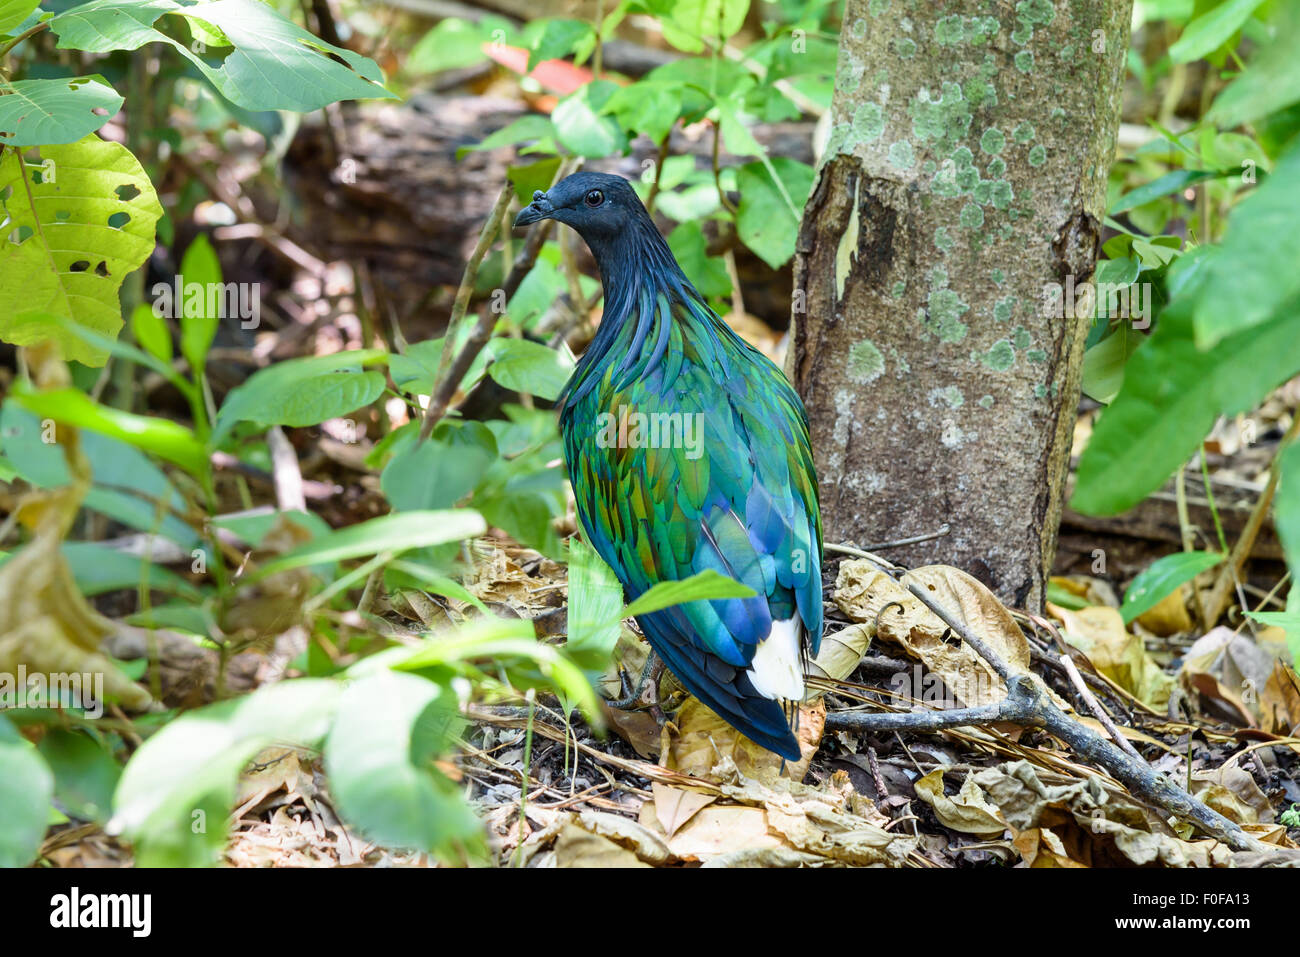 Nicobar pigeon, Nicobar dove or Caloenas nicobarica are birds that live on the island, Shooting in a forest on Koh Miang Similan Stock Photo